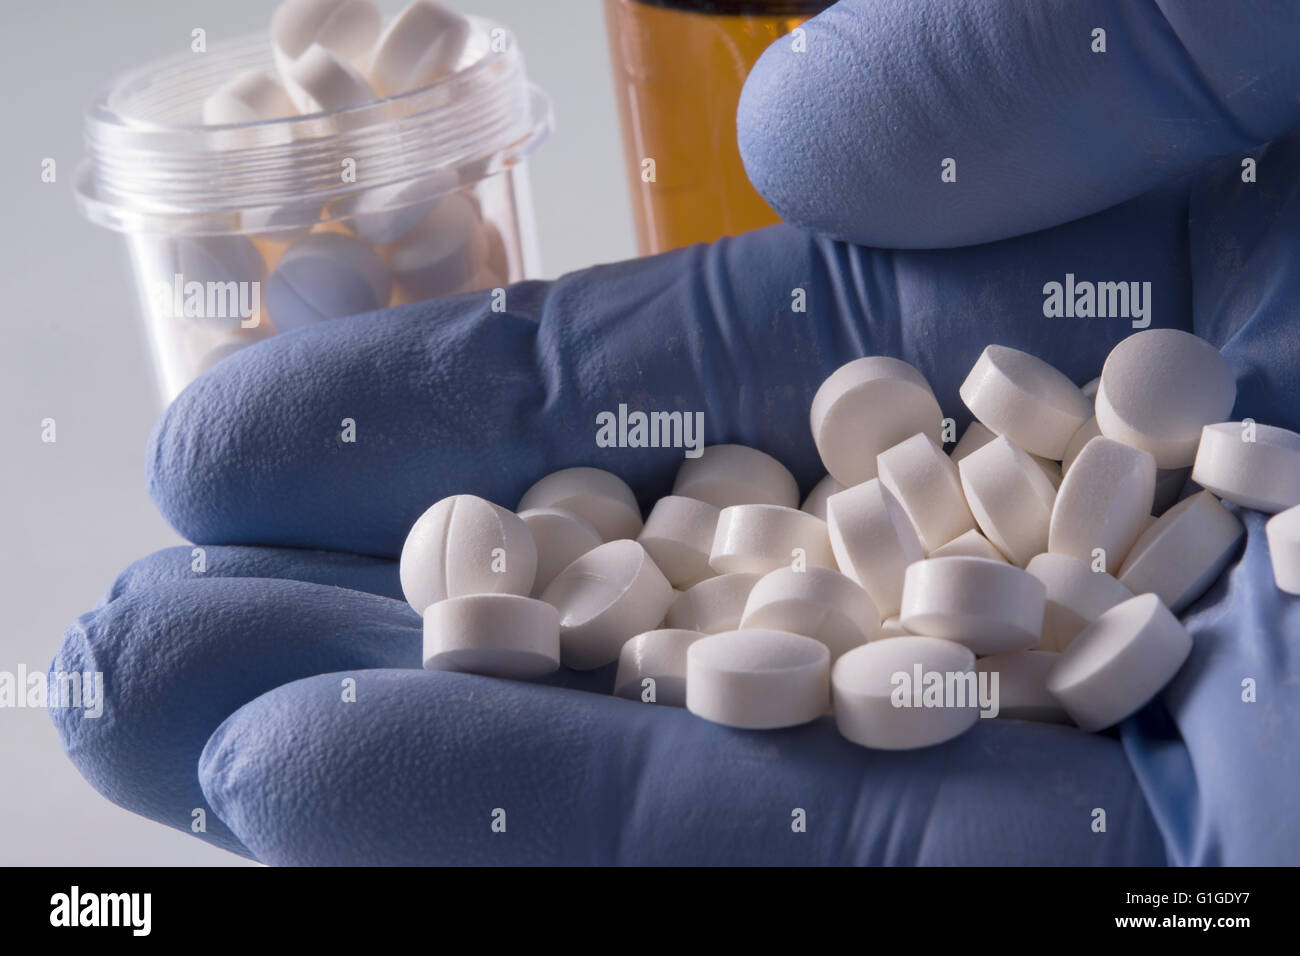 blue gloved hand holding white pills with medication bottles in background Stock Photo